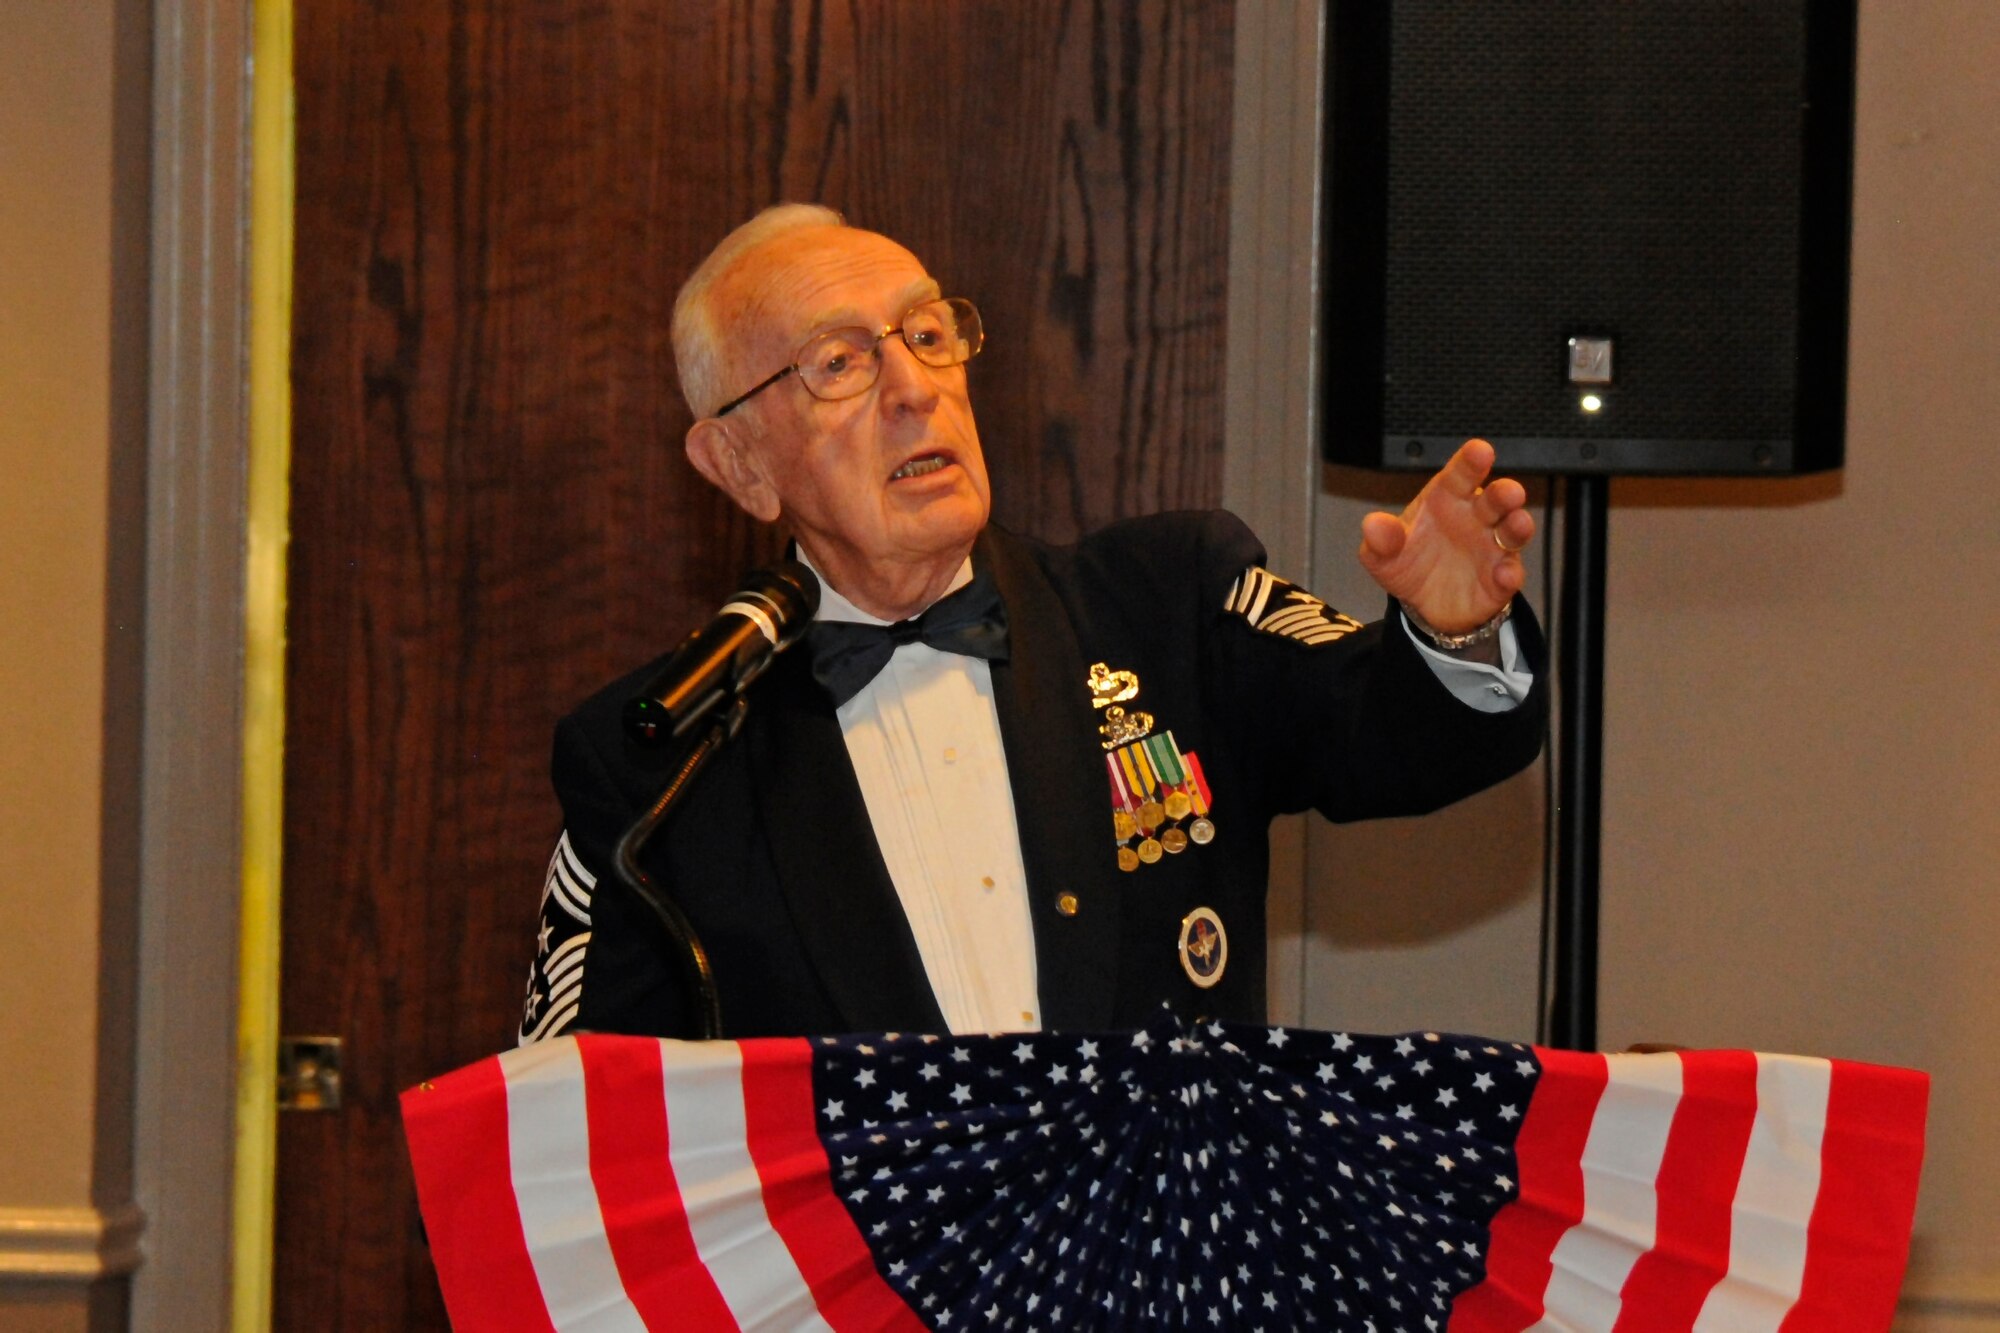 Retired Chief Master Sgt. Robert Mehaffey, recalls the highlights of his career as a guest speaker to attendees at the Air Force Ball on Laughlin Air Force Base, Texas, Sept. 30, 2017.  The Air Force Ball is an observance of the U.S. Air Force transitioning into its own branch of the U.S. Armed Forces on Sept. 18, 1947.